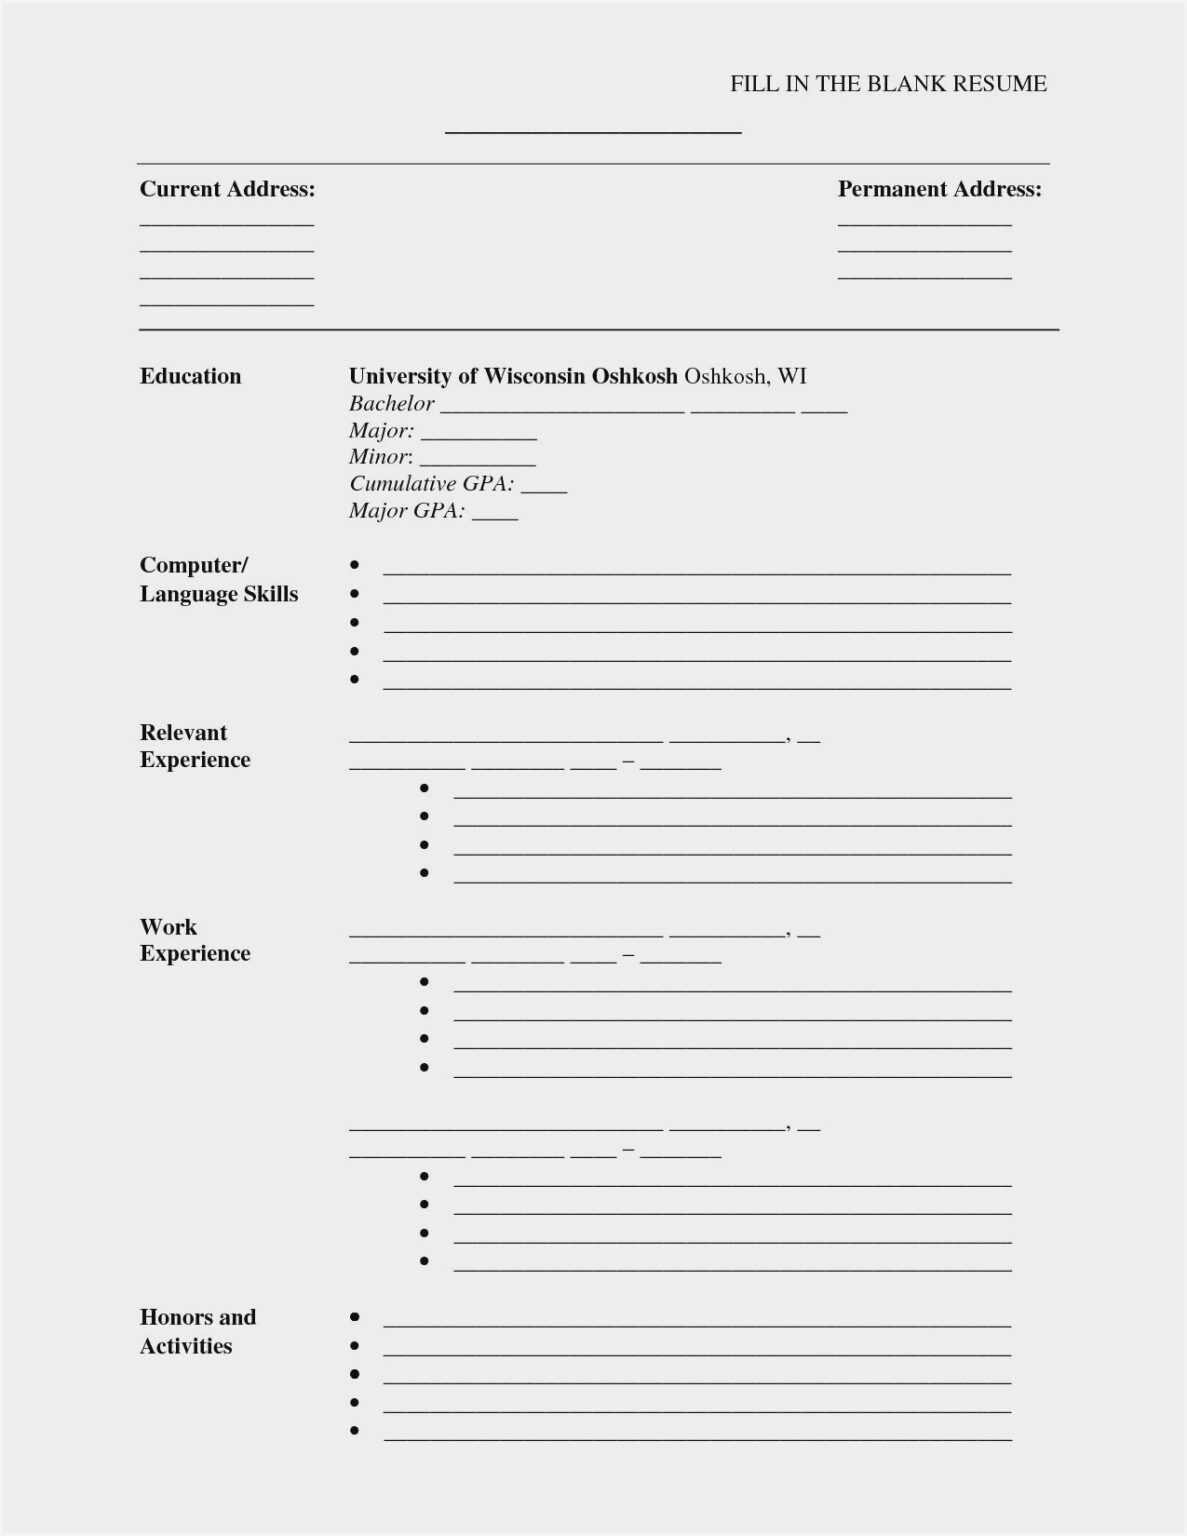 Blank Resume Templates For Microsoft Word Best Professional Templates